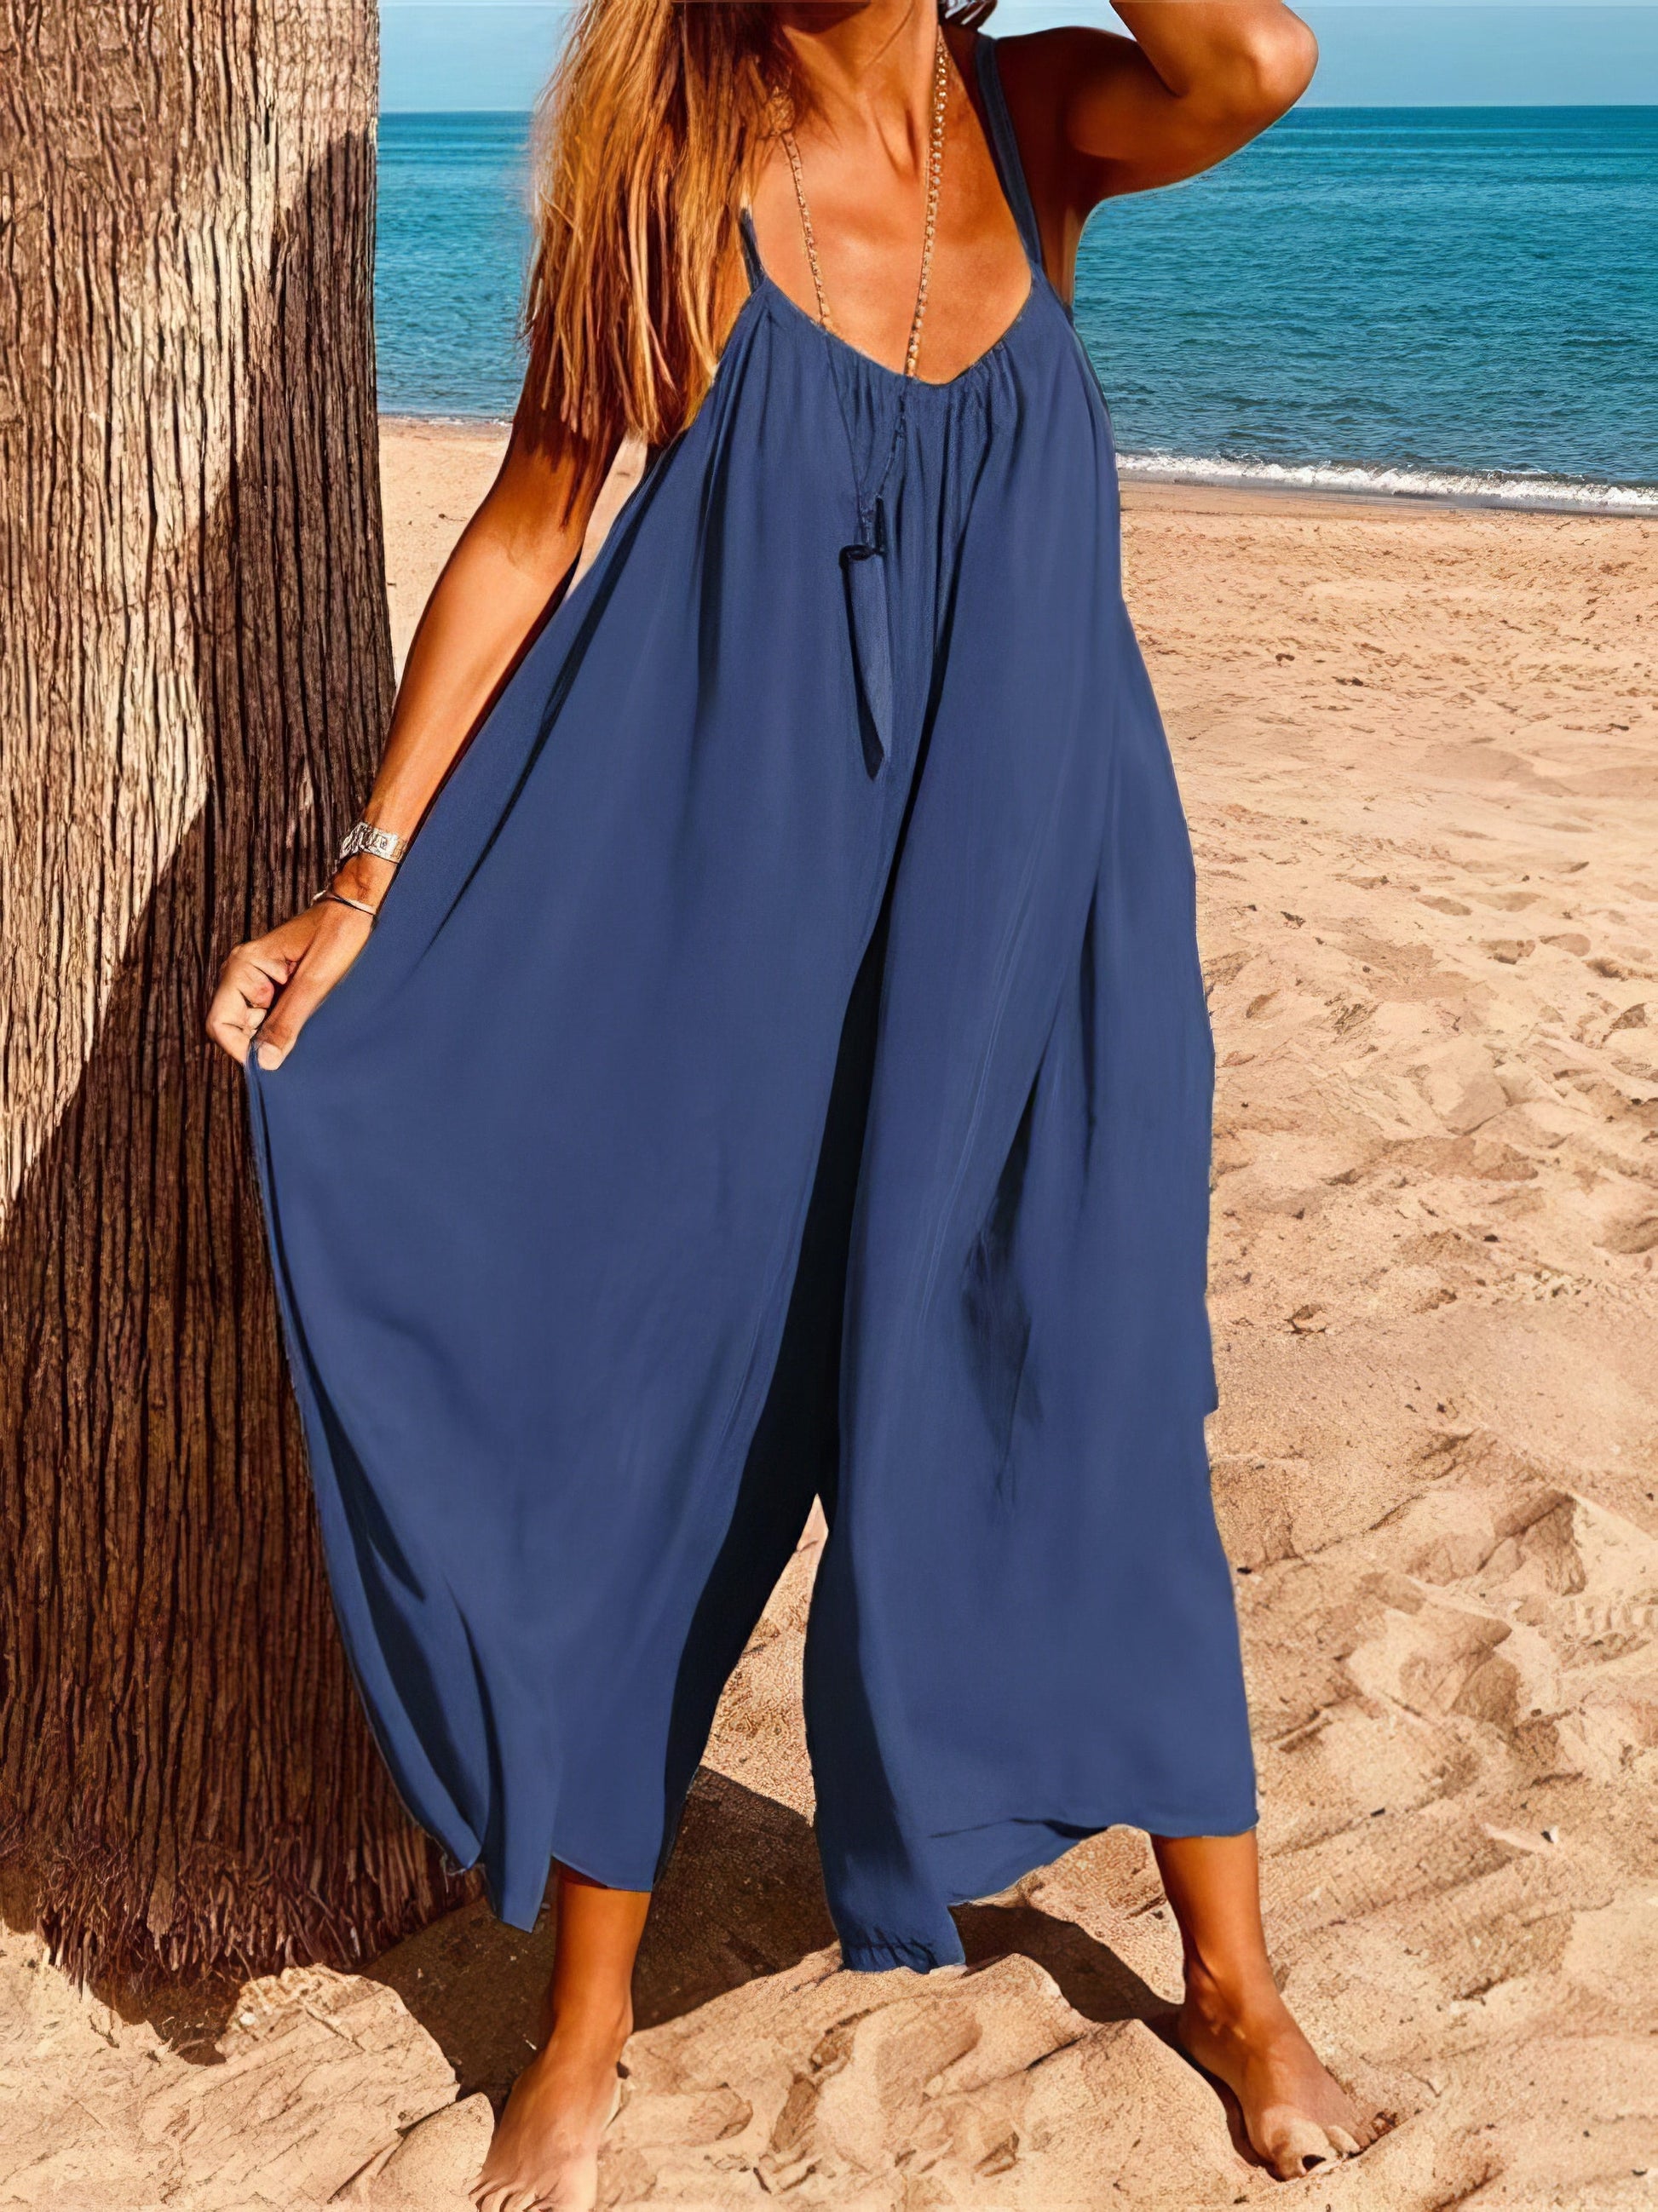 Jumpsuits - Summer Sleeveless Loose Leisure Cool One-Piece Suspenders - MsDressly